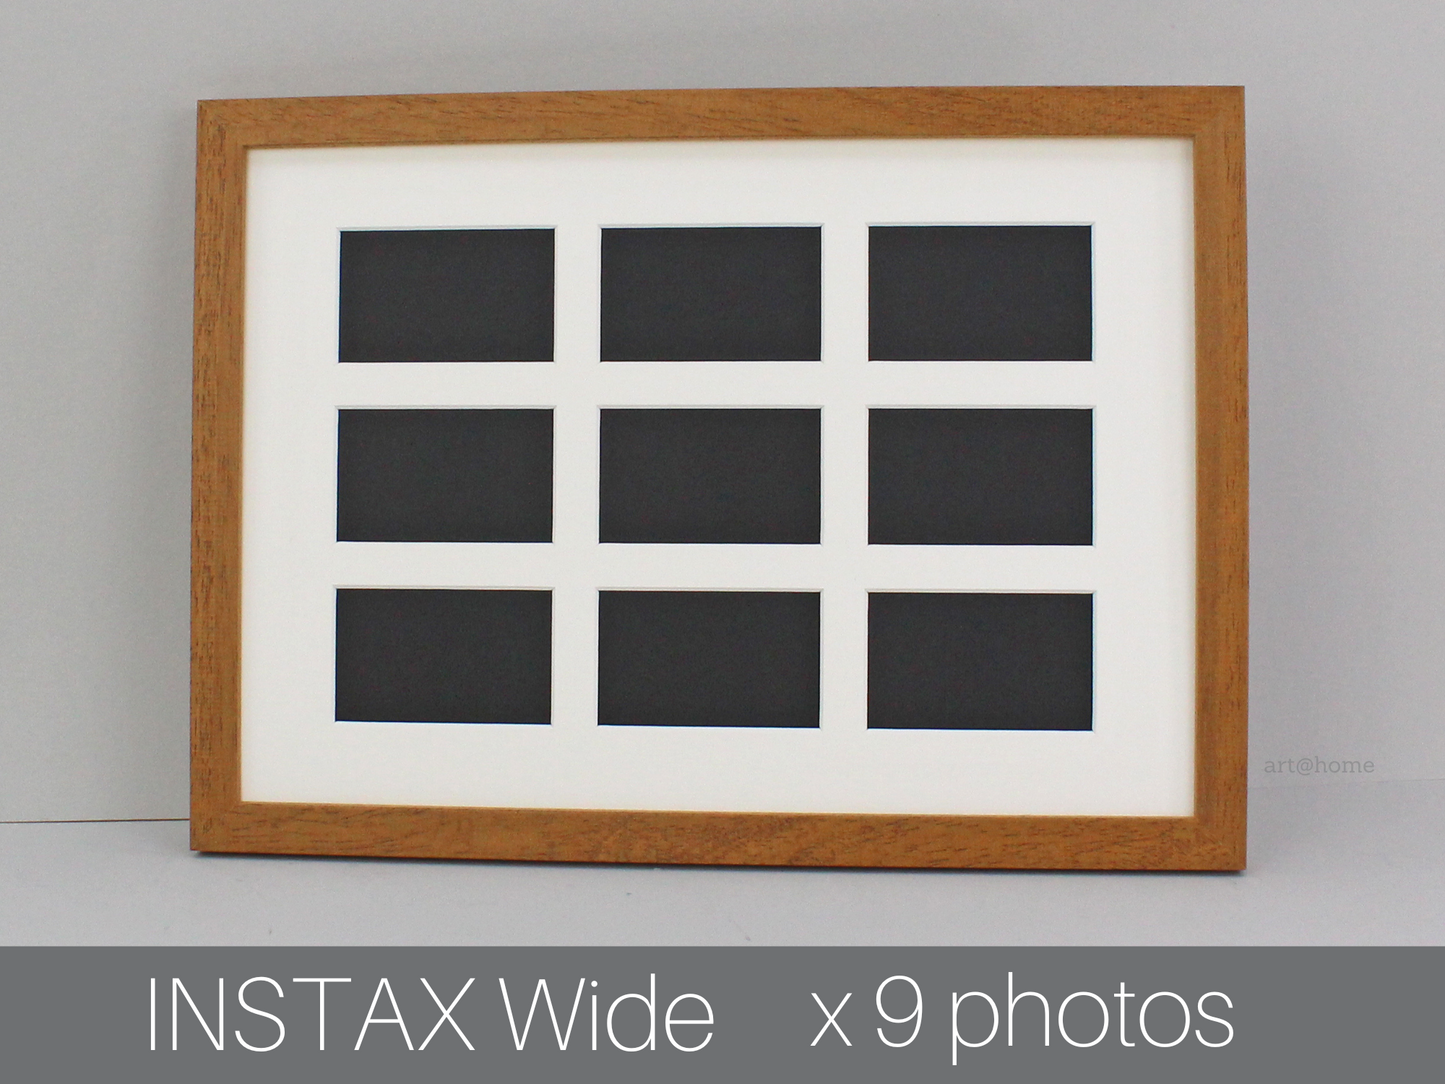 Instax Wide. Suits Nine Instax wide sized Photos, Visual aperture 9.5x5.8cm. A3 Wooden Multi Aperture Frame.